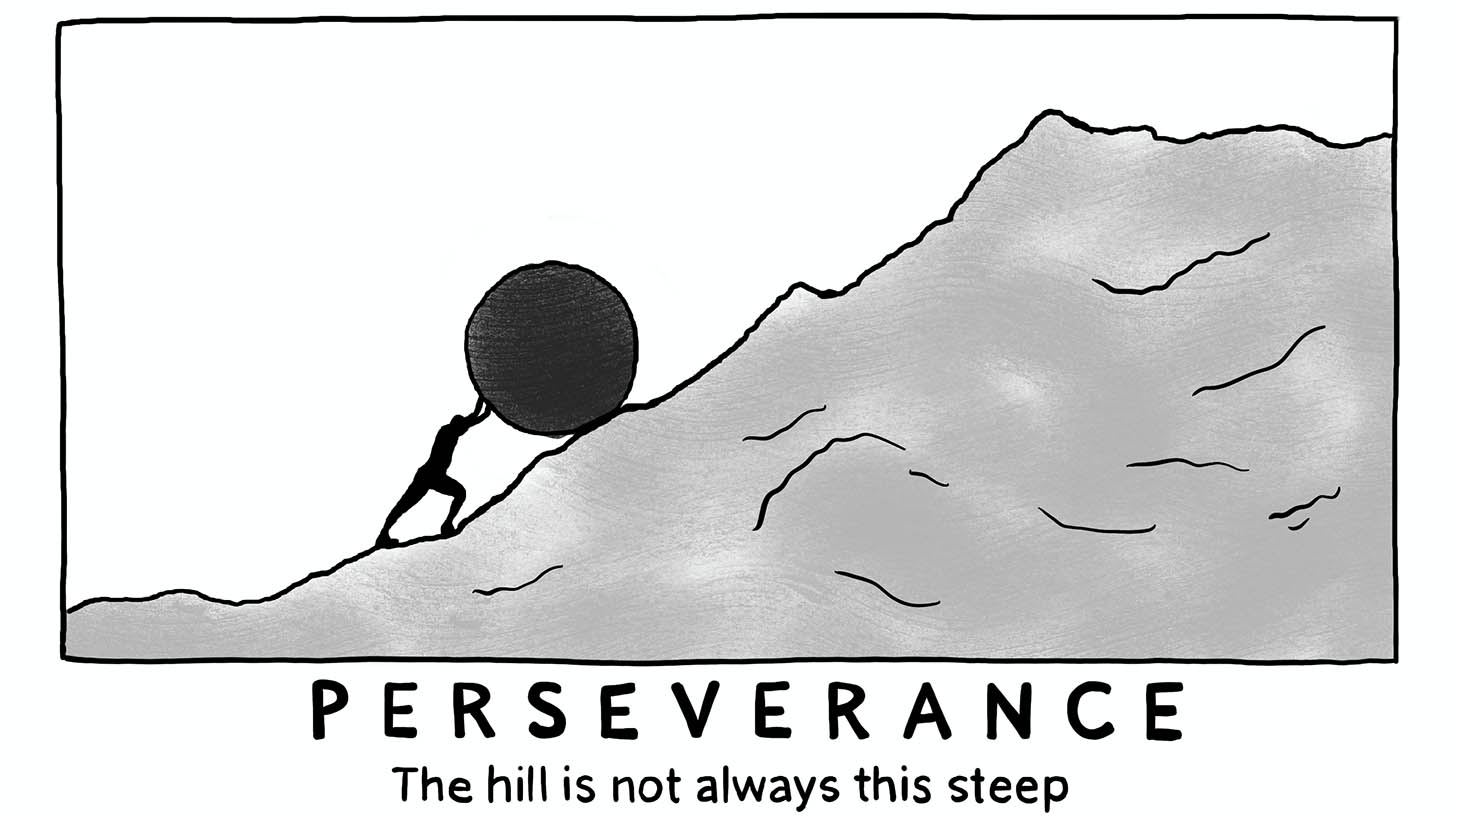 Practice, Perseverance, and Hope: Consistent effort yields results.